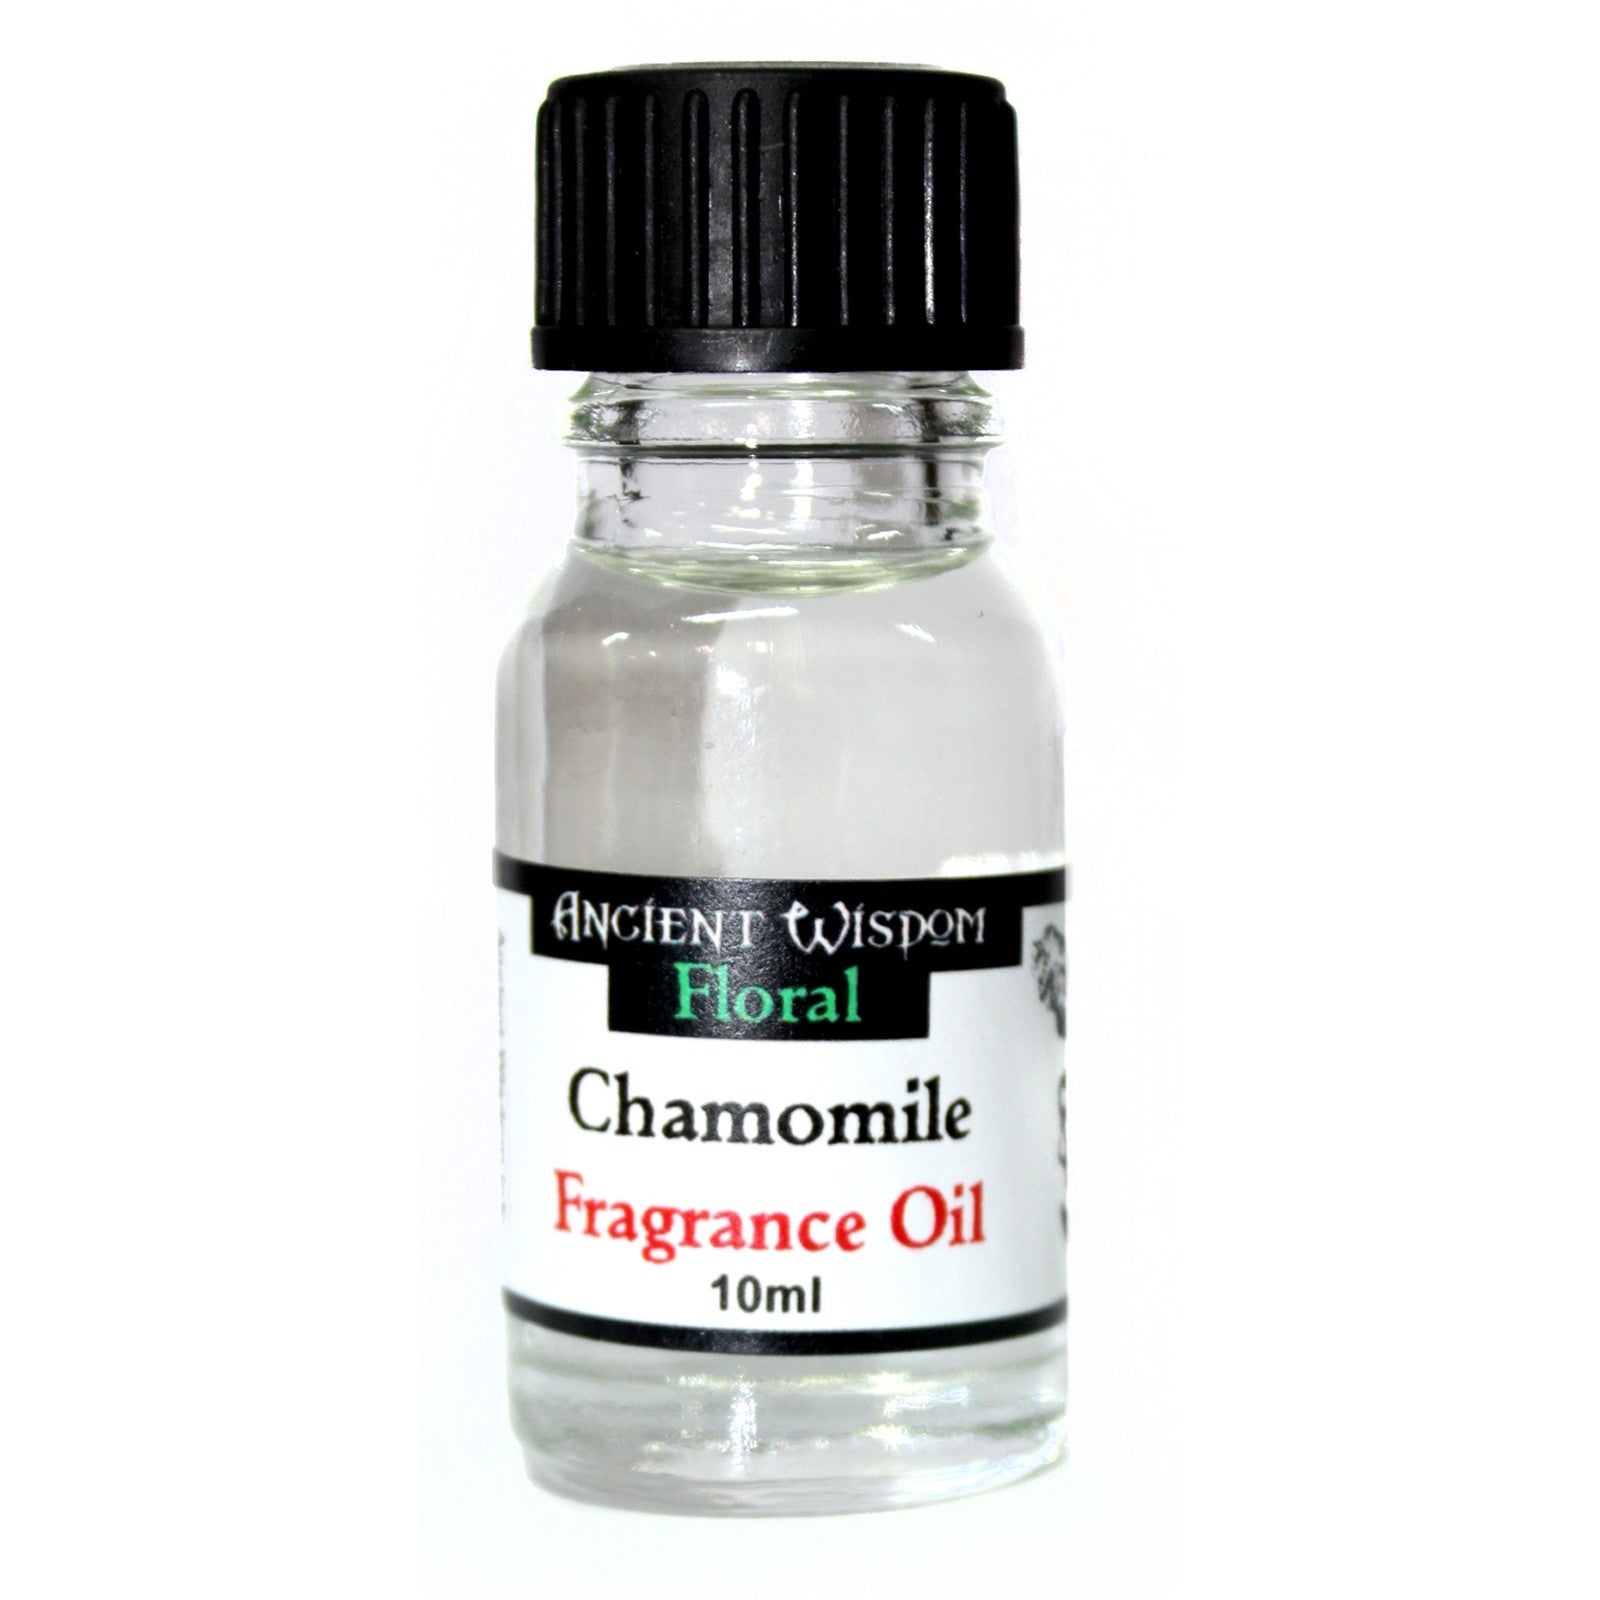 View 10ml Chamomile Fragrance Oil information